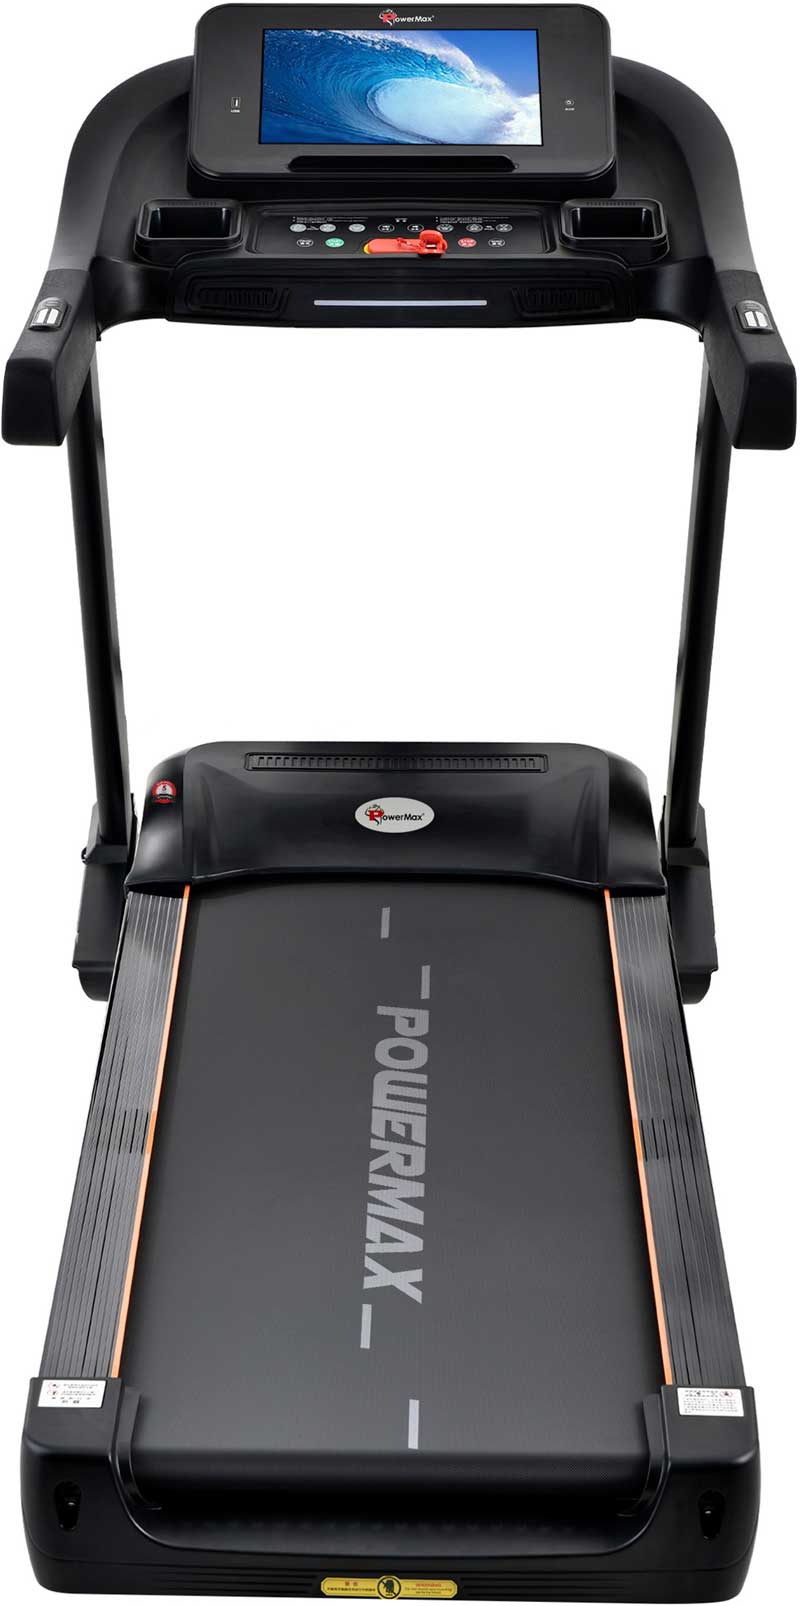 PowerMax Fitness New TAC-585 Semi-Commercial Motorized Treadmill launched in 2022 